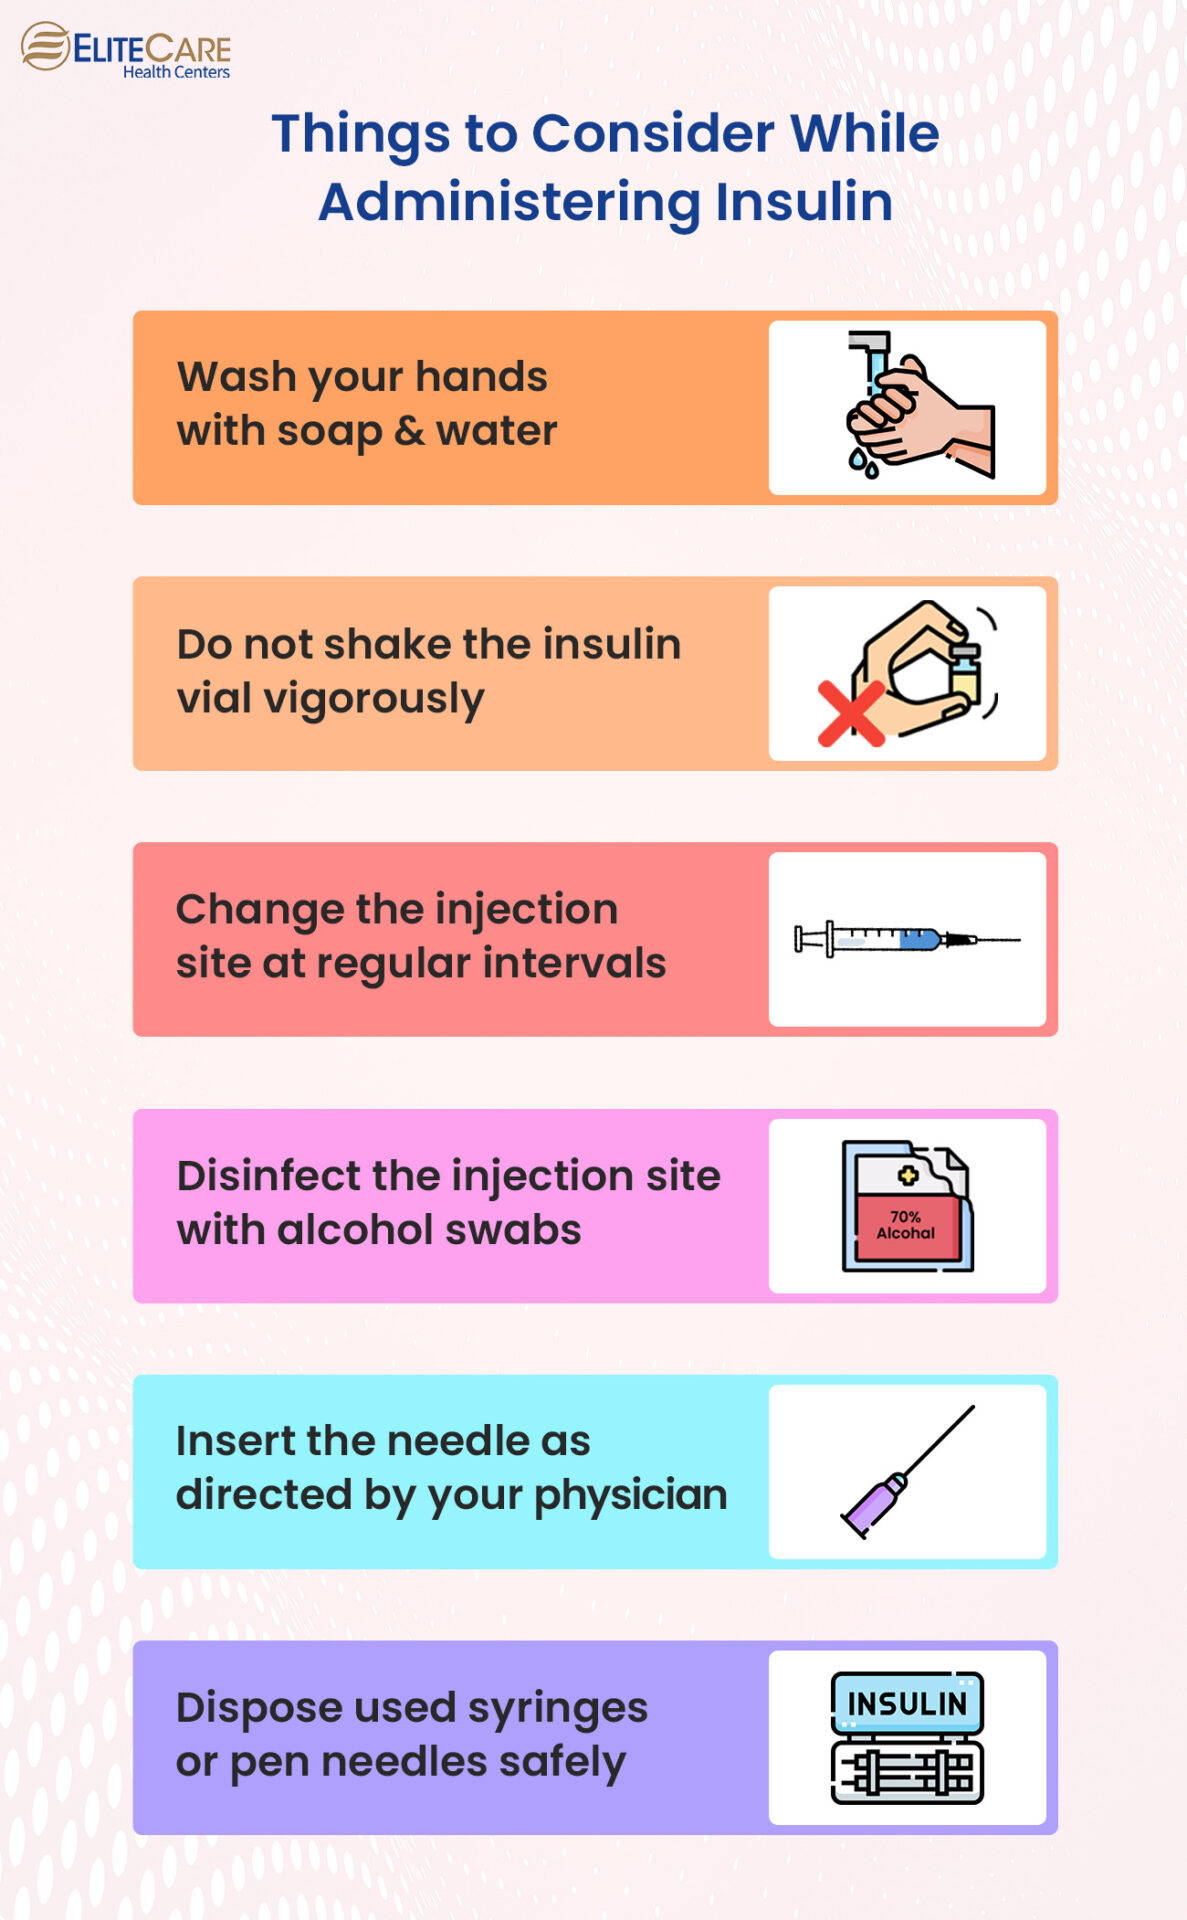 Things to Consider While Administering Insulin